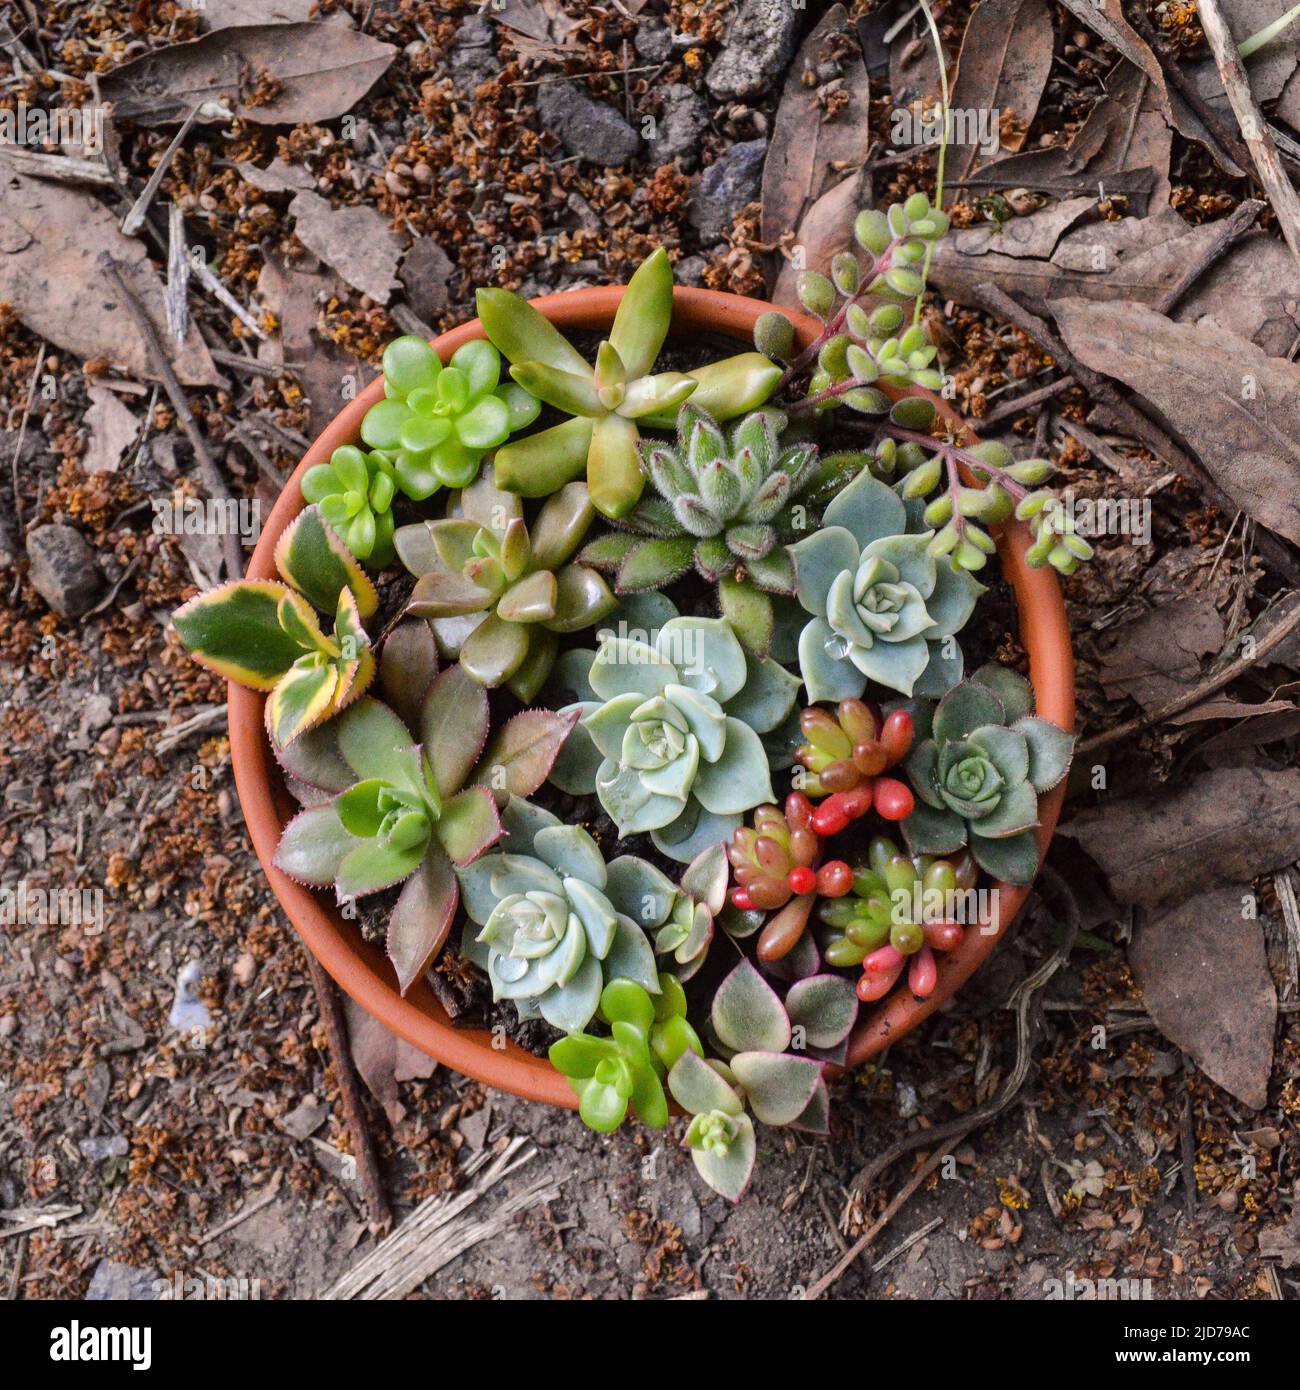 mini garden of variety of succulents in a pot Stock Photo